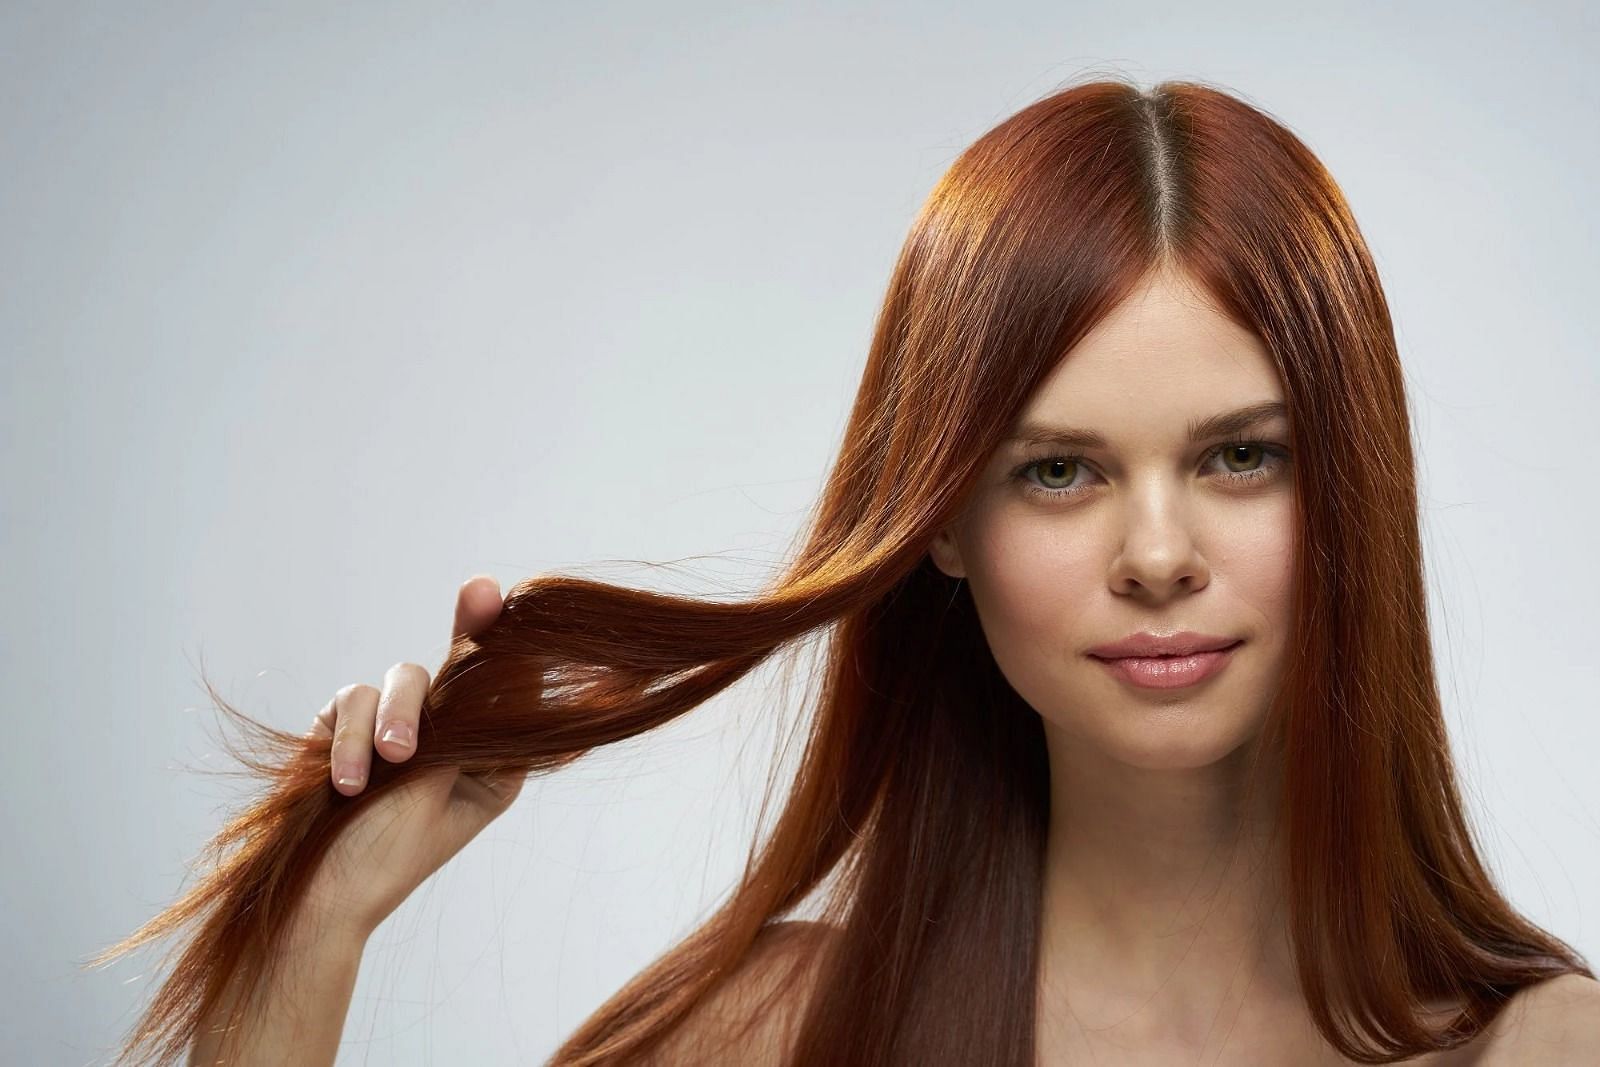 Cinnamon for hair (Image via Getty Images)